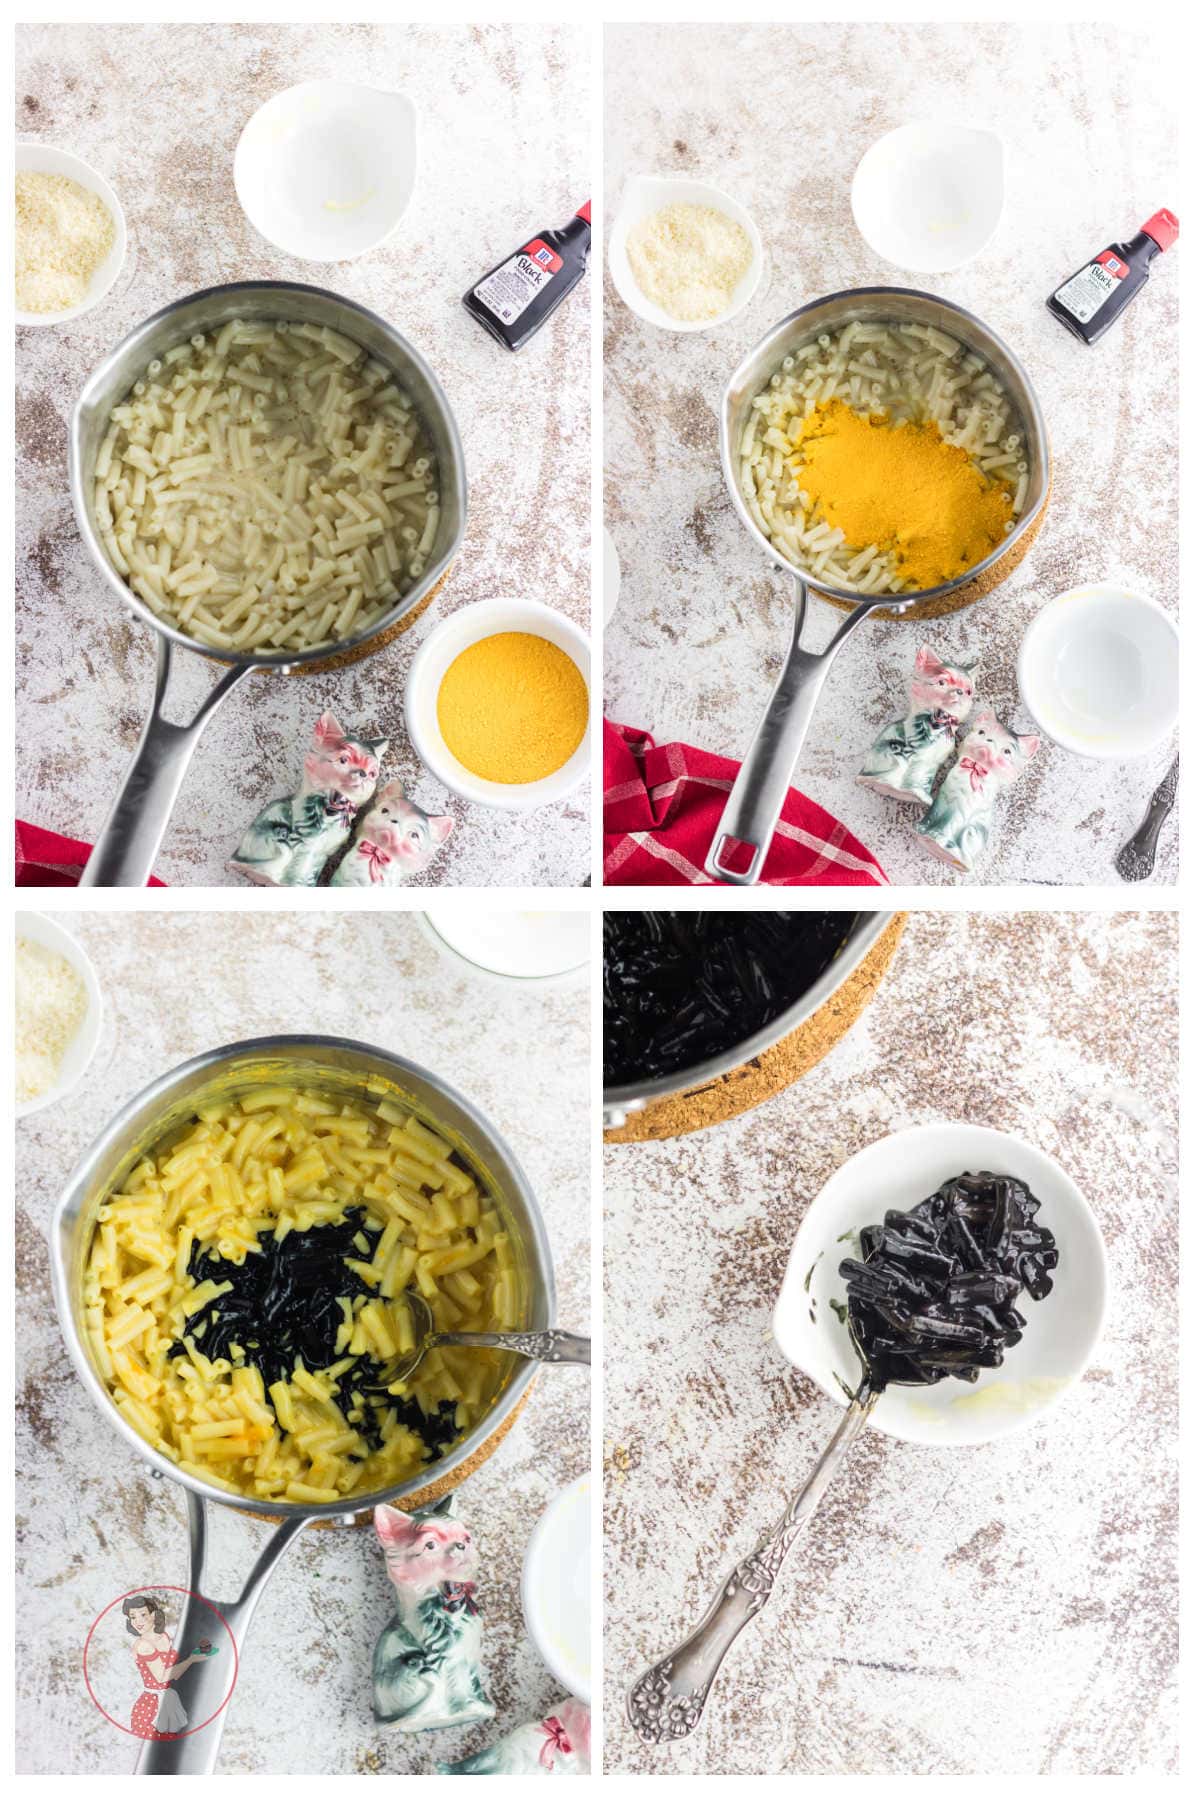 Step by step instructions for Halloween mac and cheese.